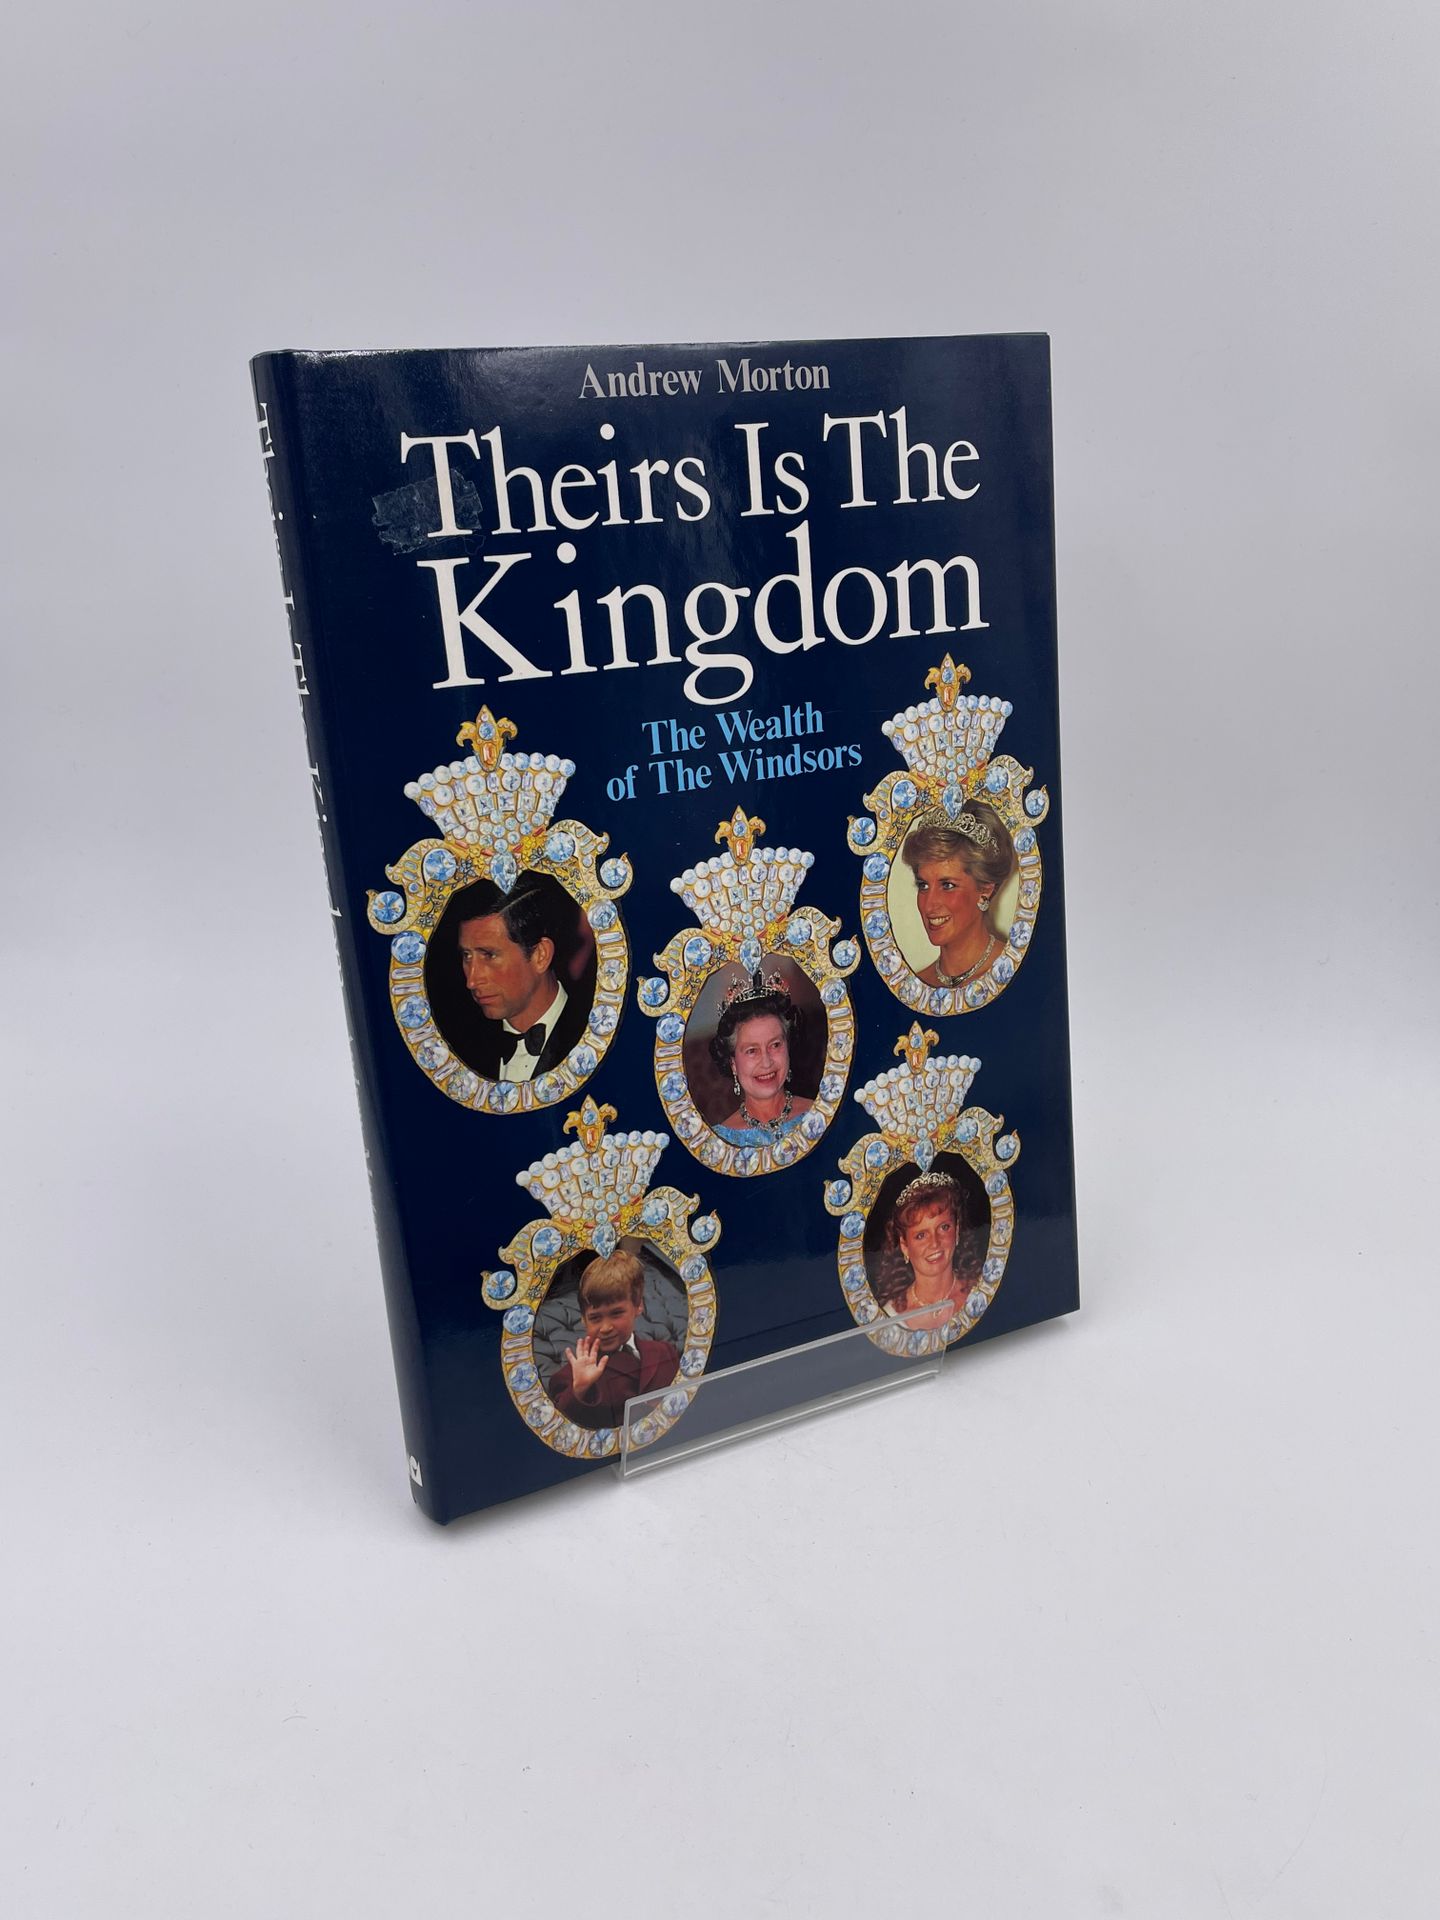 Null 1 Volume : "THEIRS IS THE KINGDOM, THE WEALTH OF THE WINDSORS", Andrew Mort&hellip;